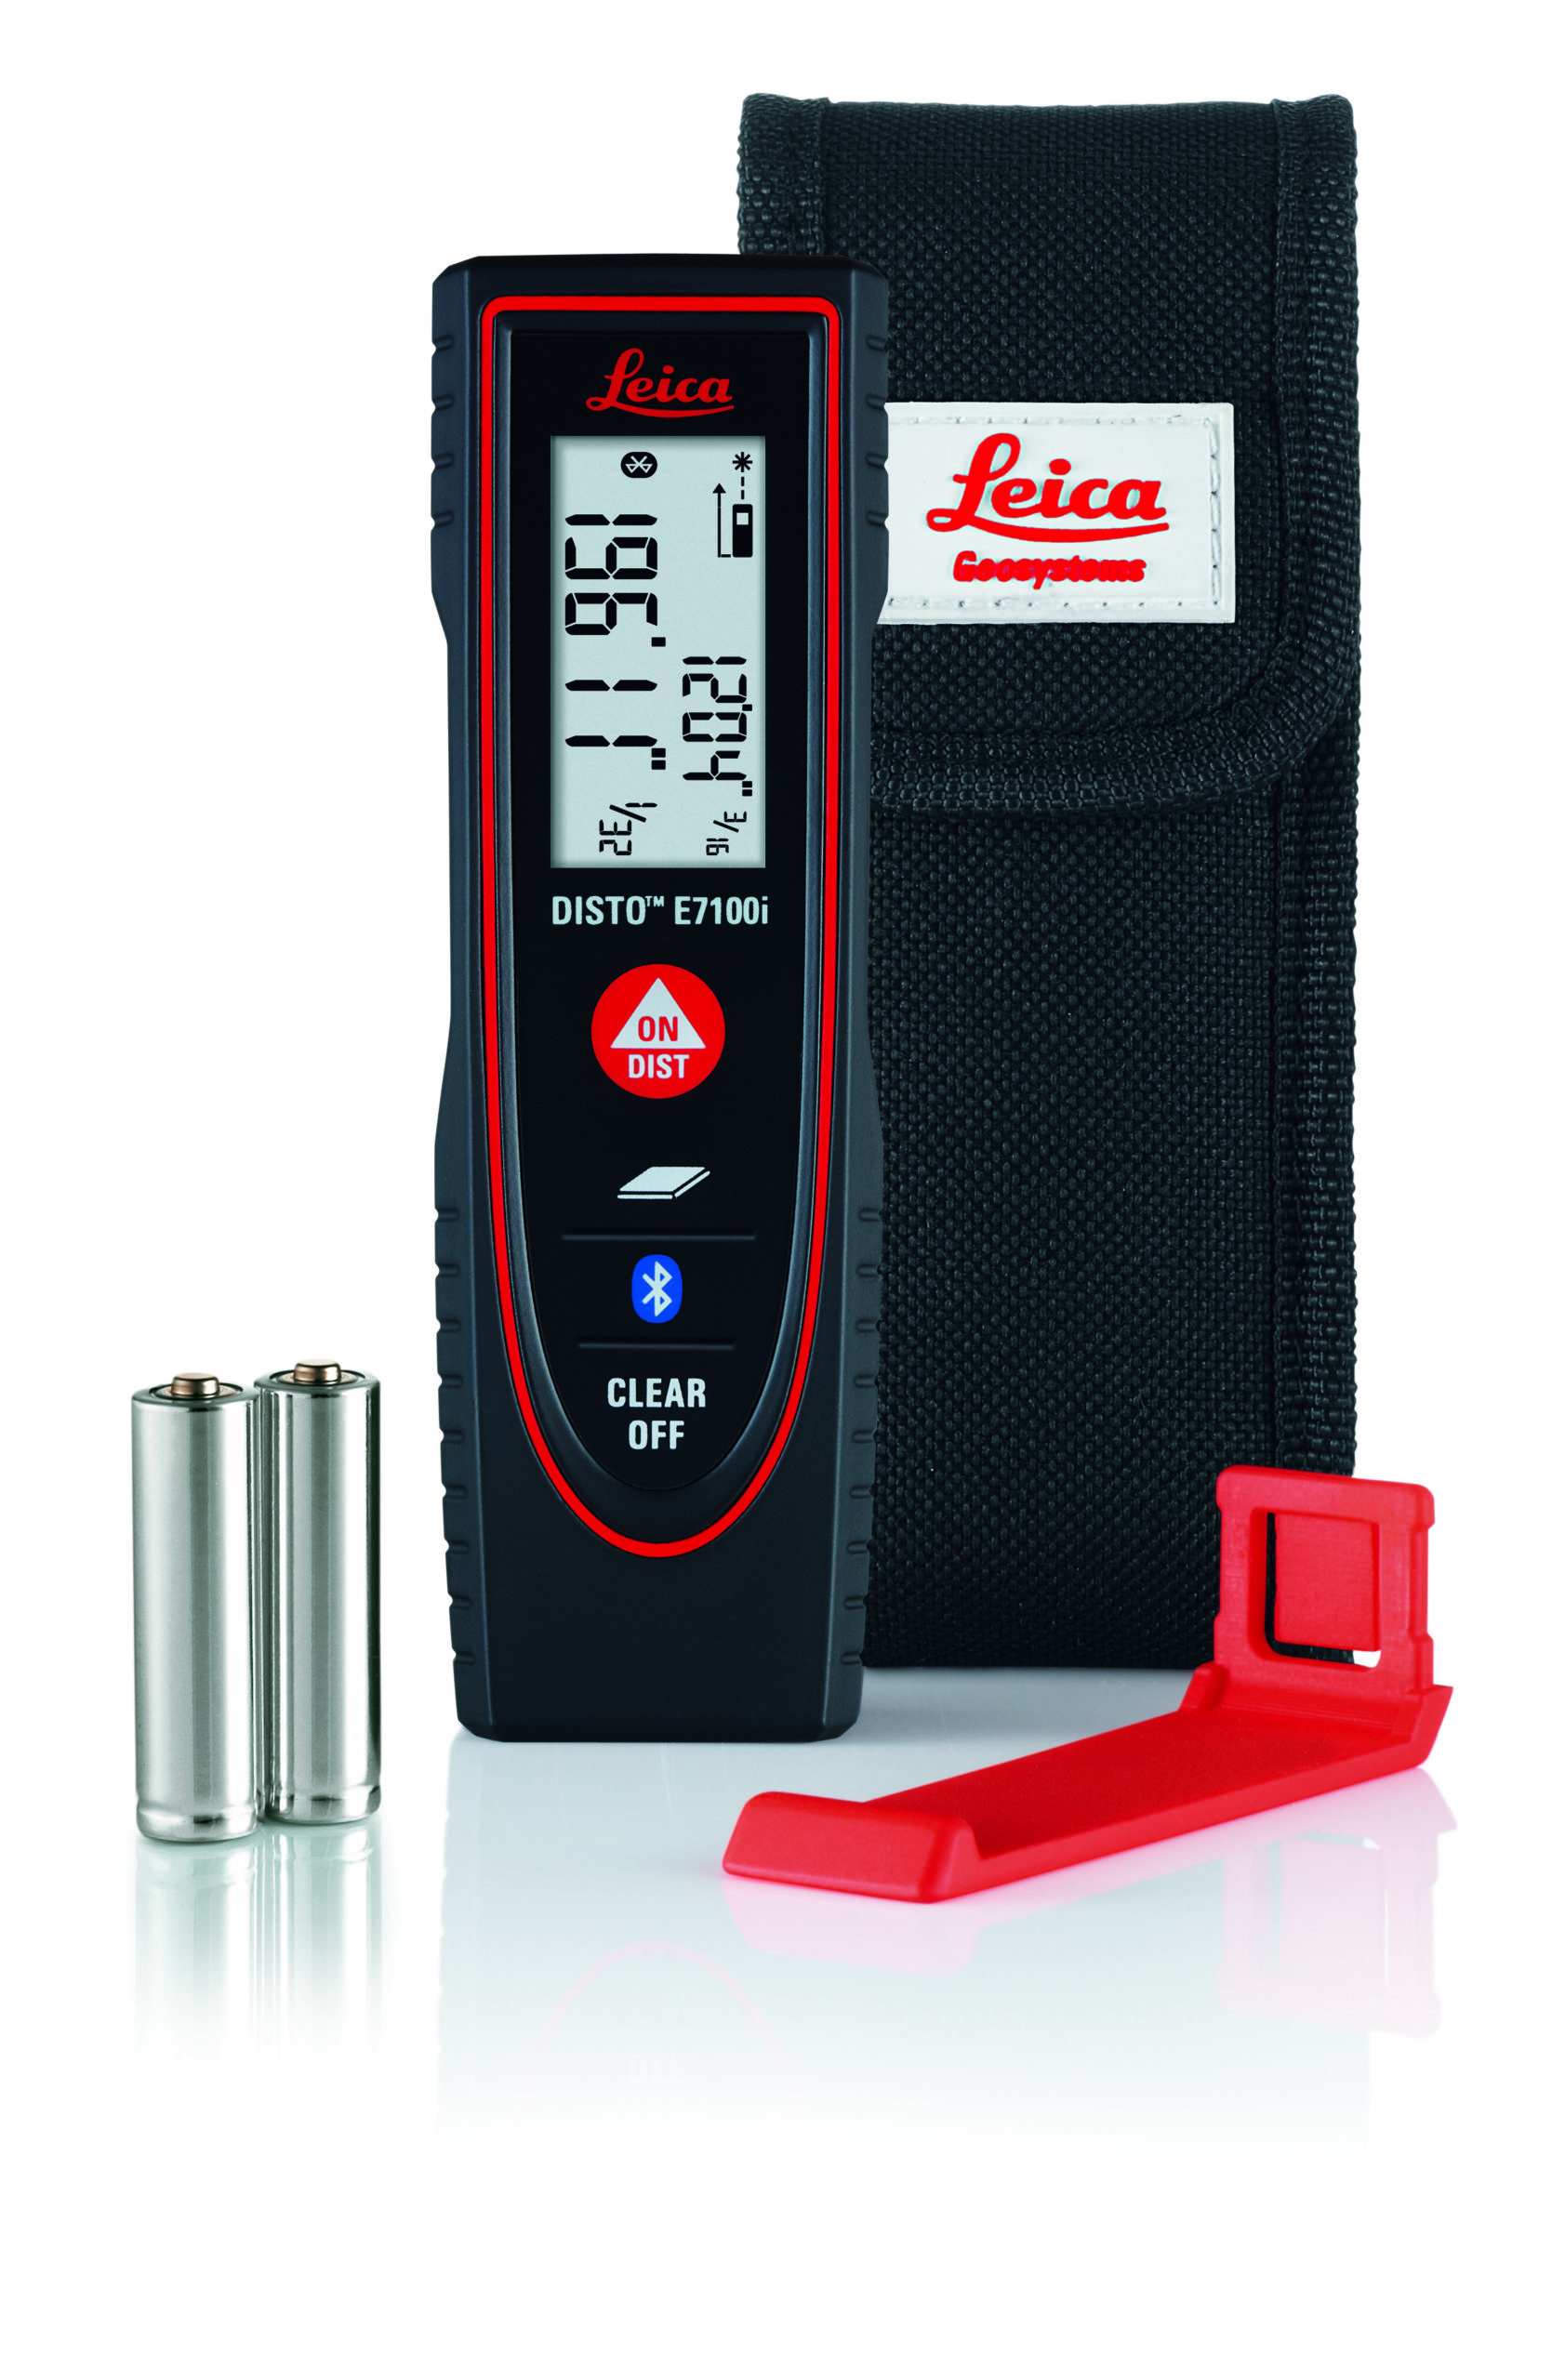 Leica Disto E7100I Laser Distance Meter with Bluetooth